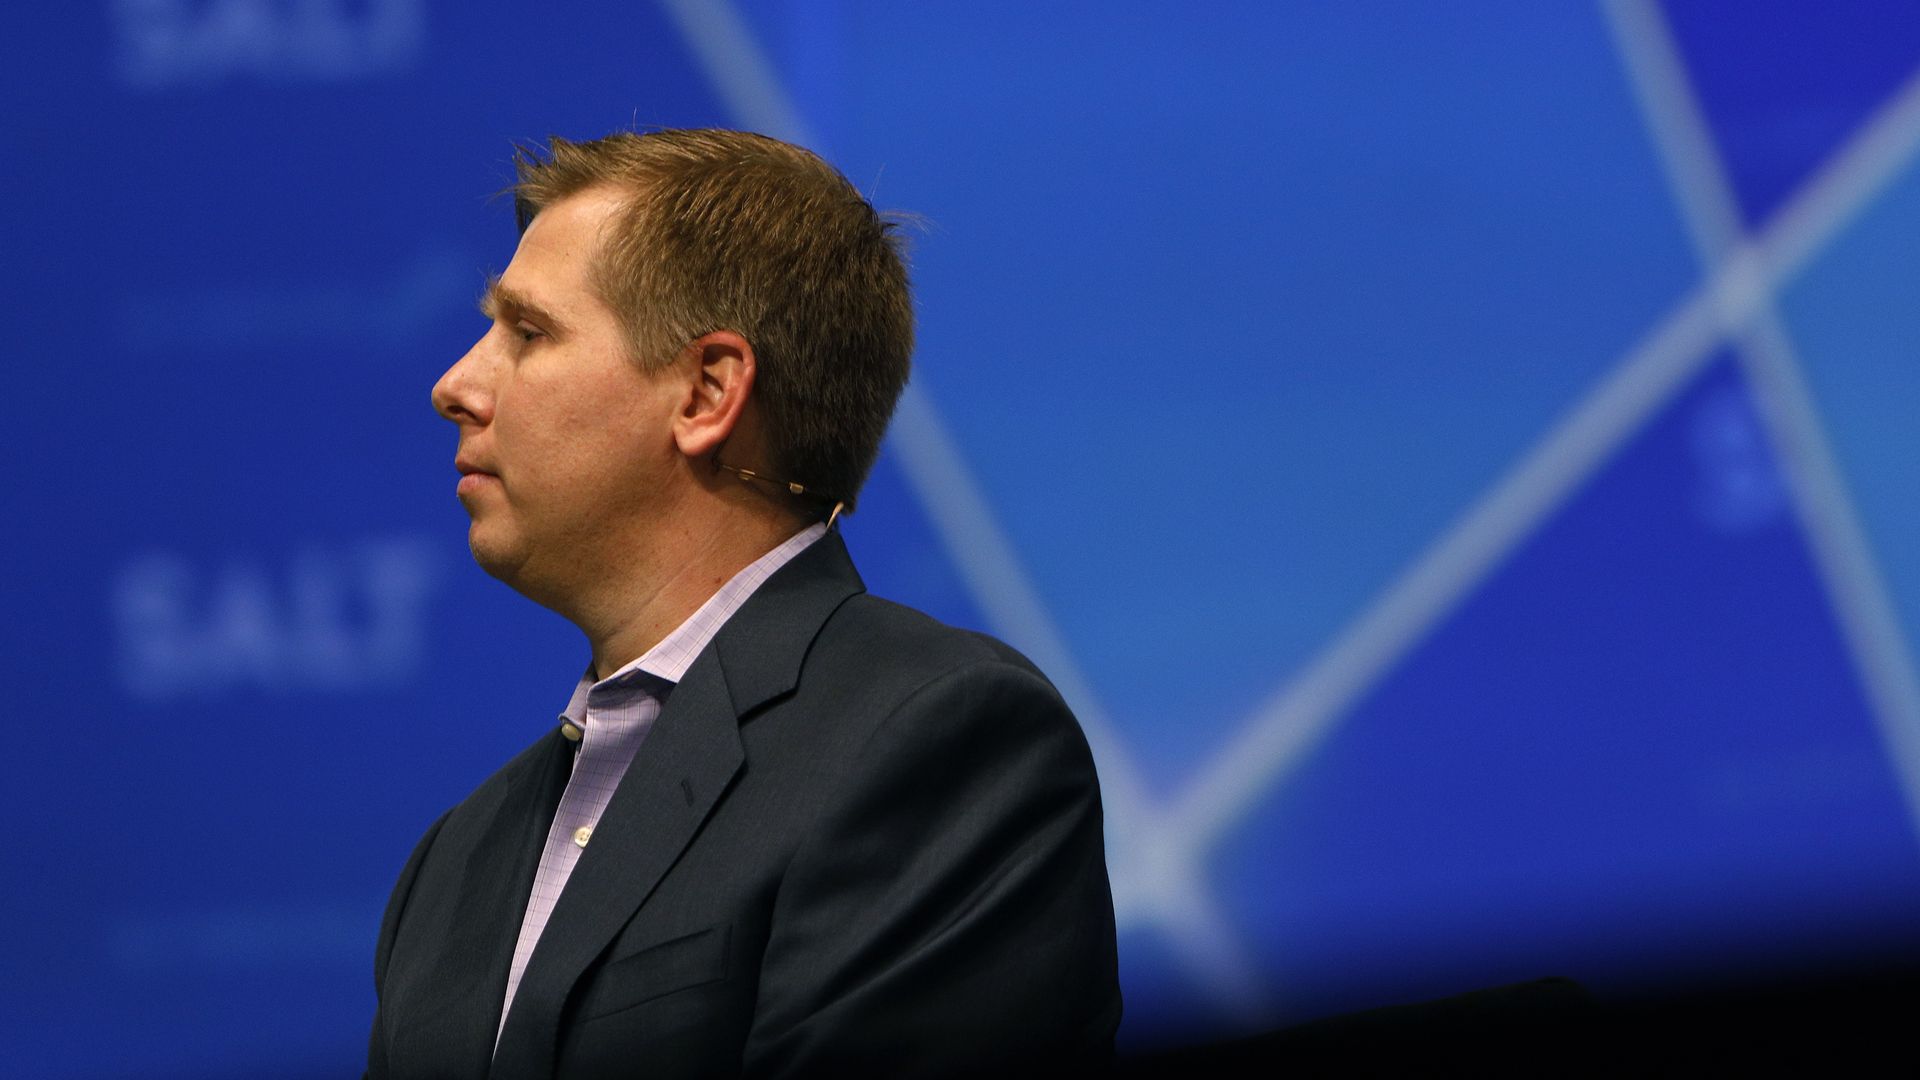 Grayscale Says Barry Silbert Resigns as Chairman of the Board - BNN Bloomberg